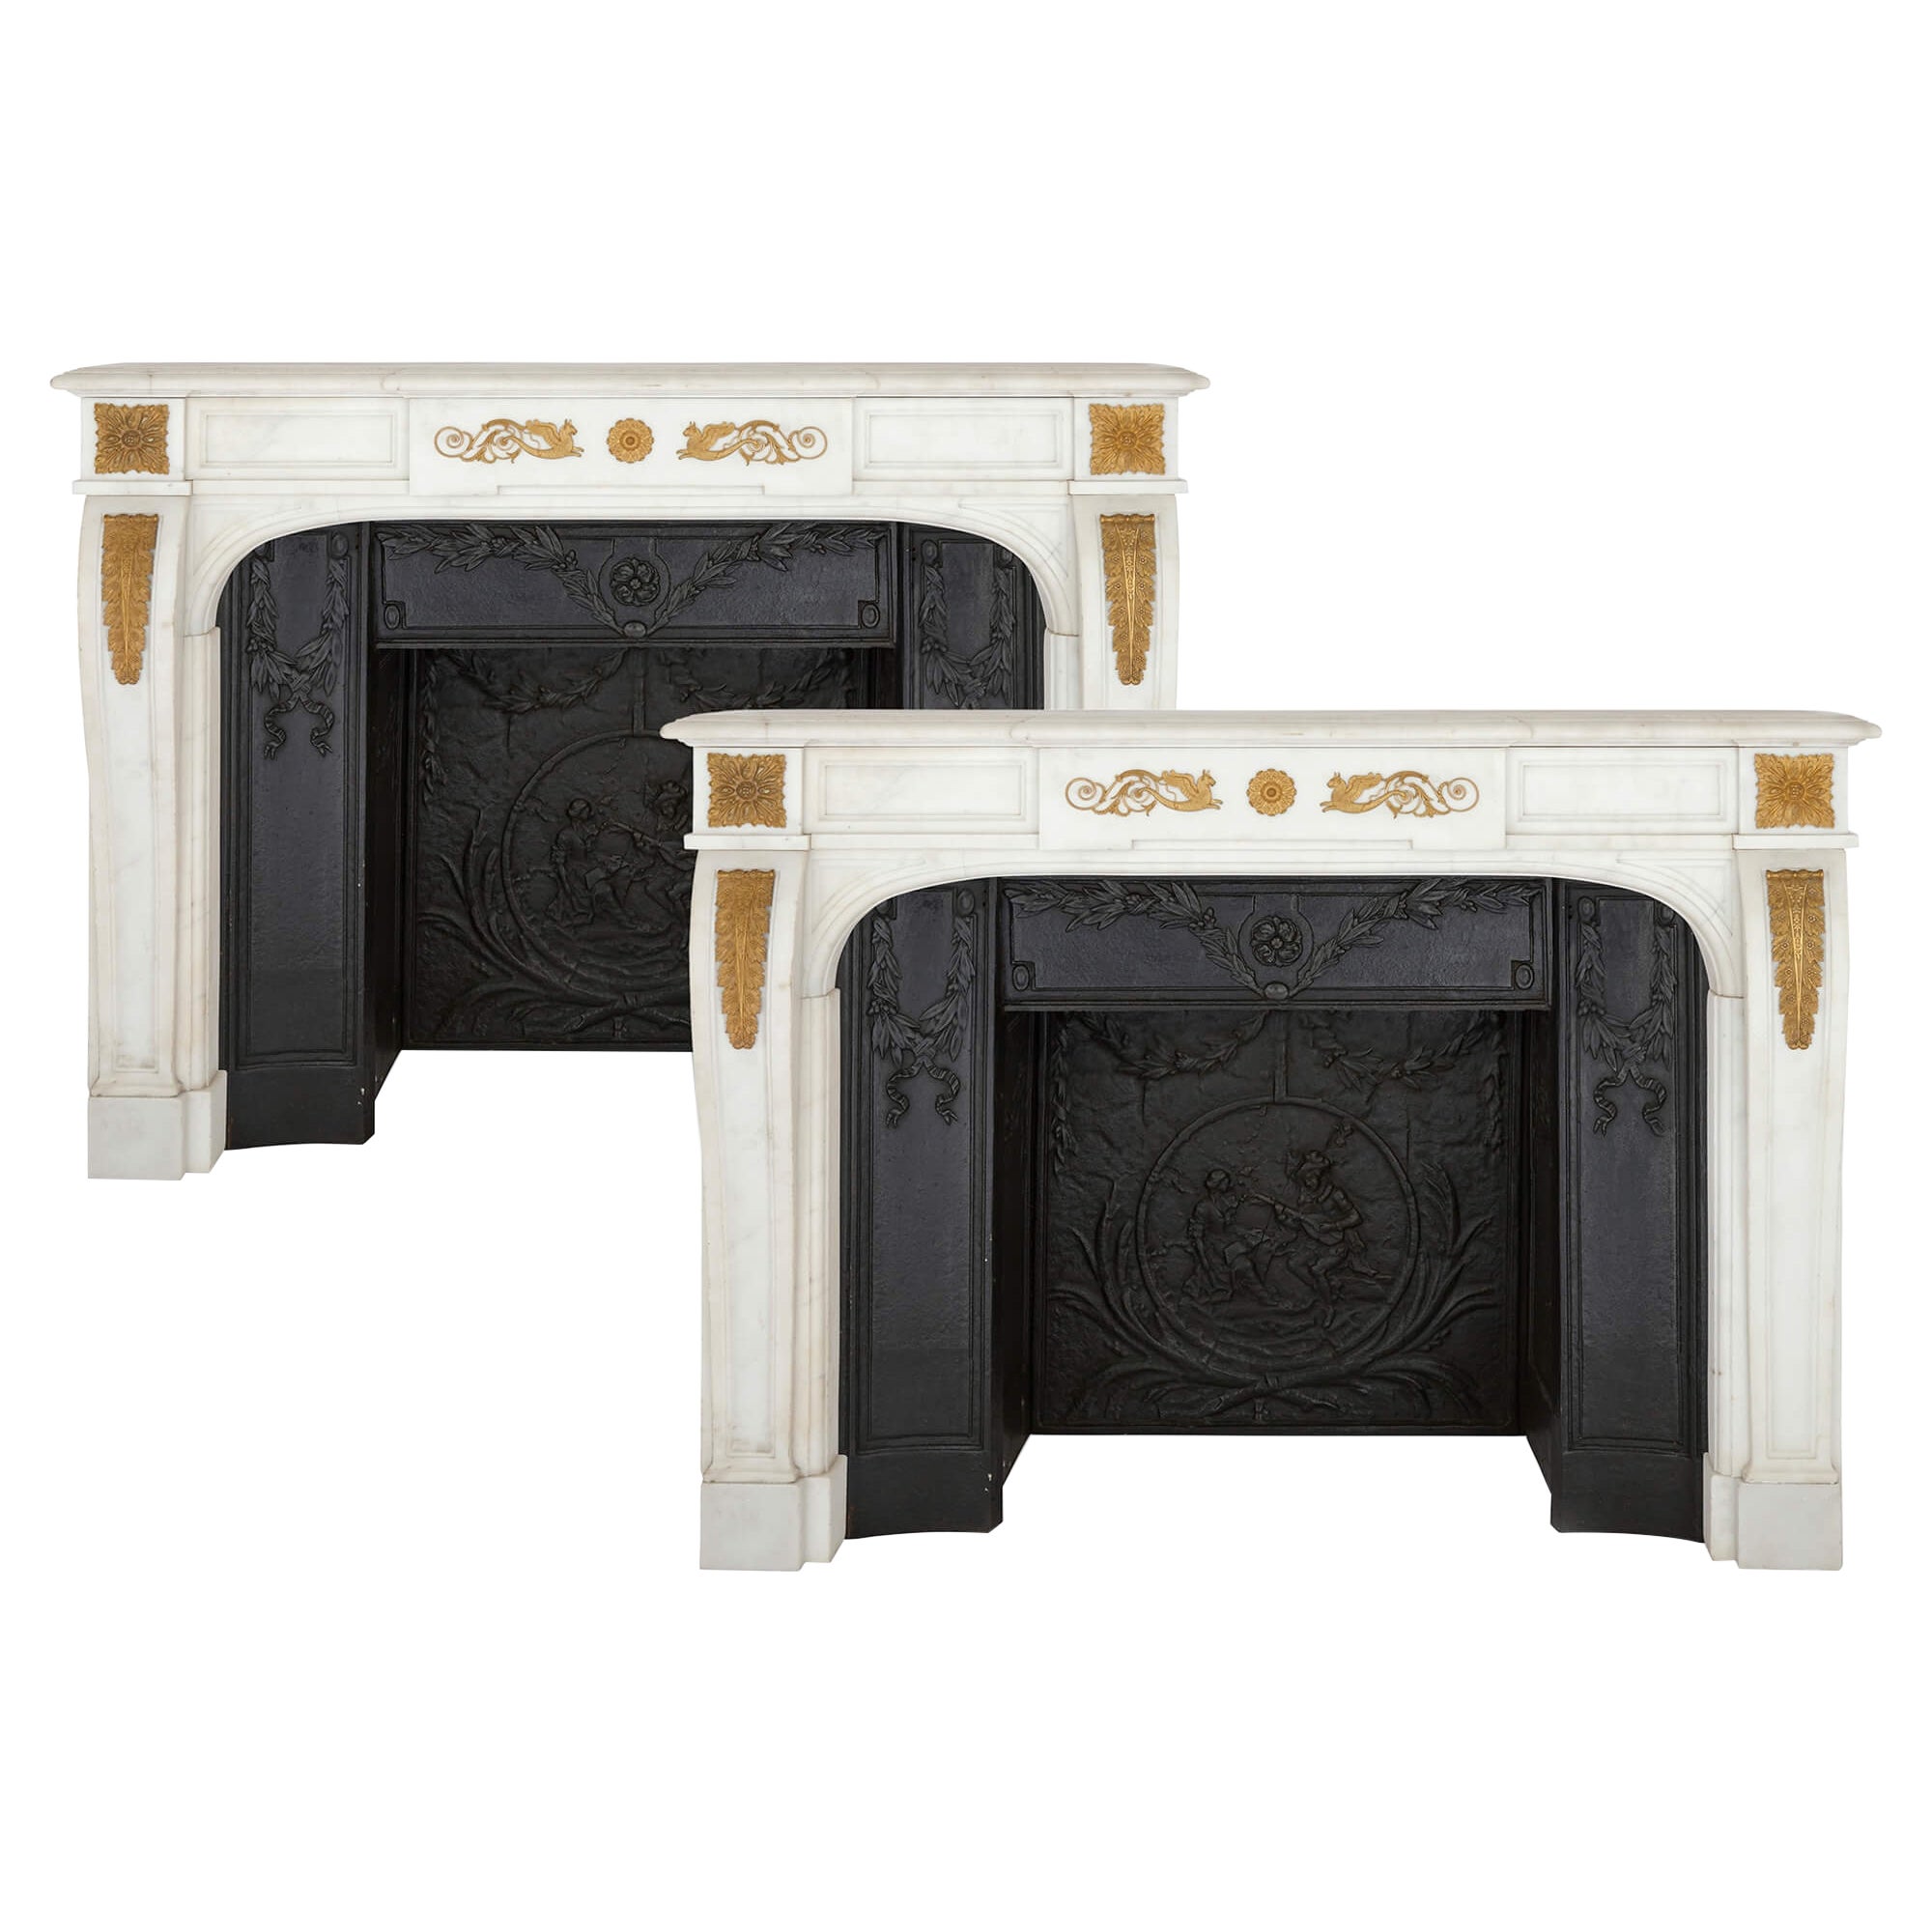 Pair of Antique French Ormolu Mounted Marble Fireplaces with Cast Iron Insets For Sale